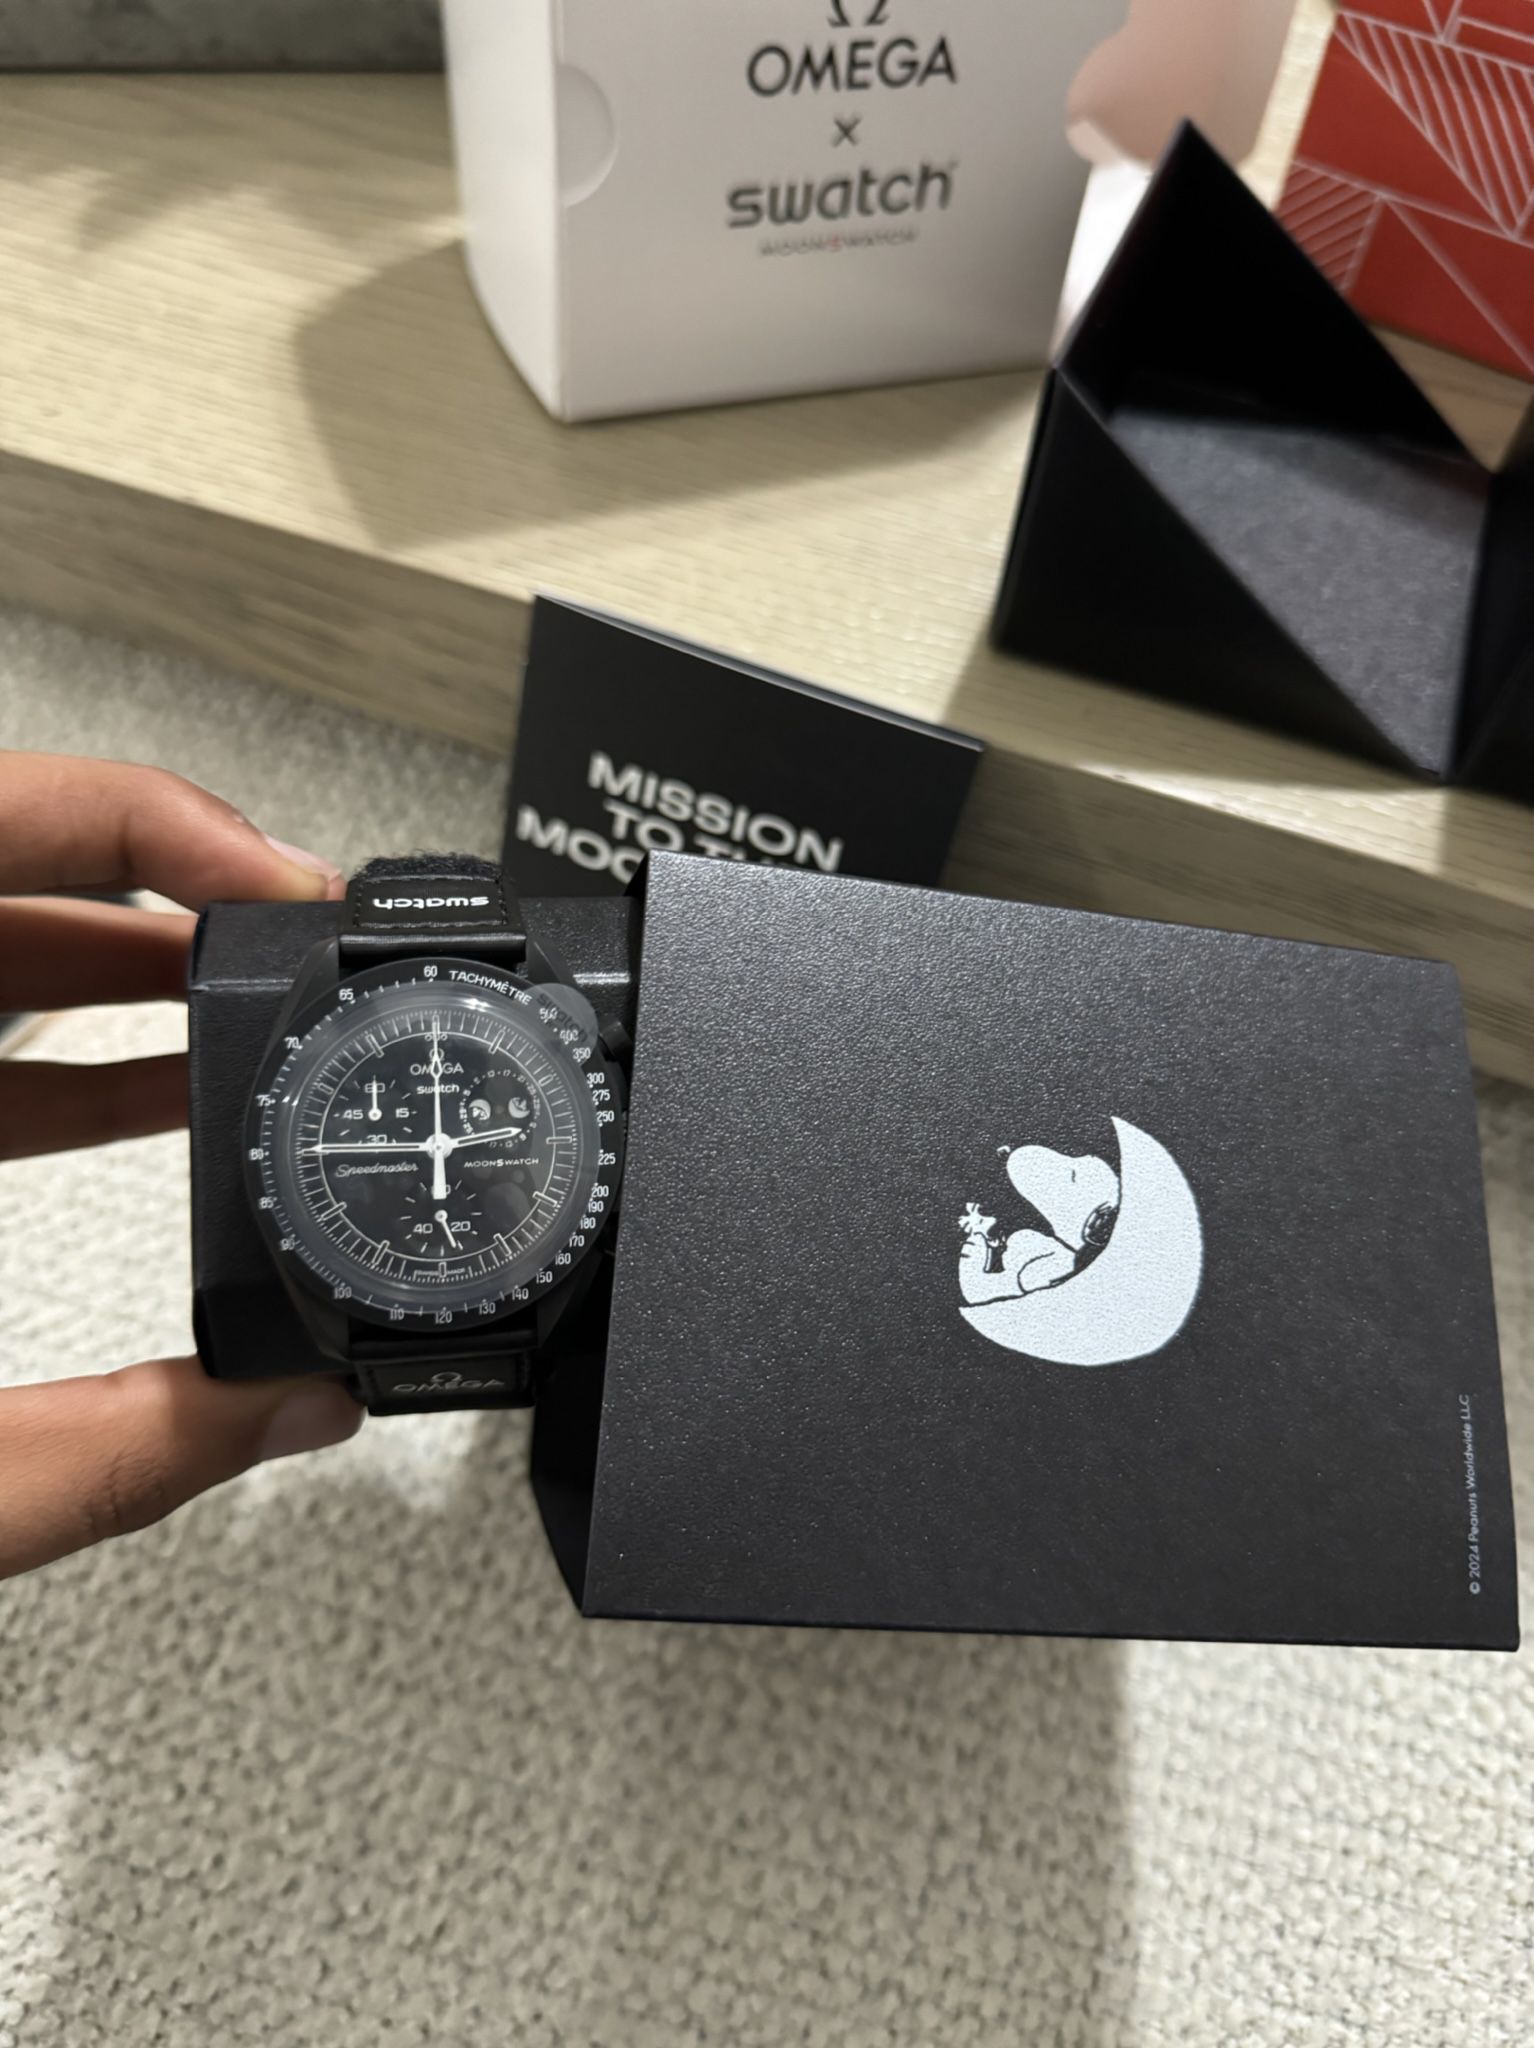 OMEGA x Swatch Black Snoopy Moonswatch New MOON Mission to Moonphase  Speed master WITH RECEIPT